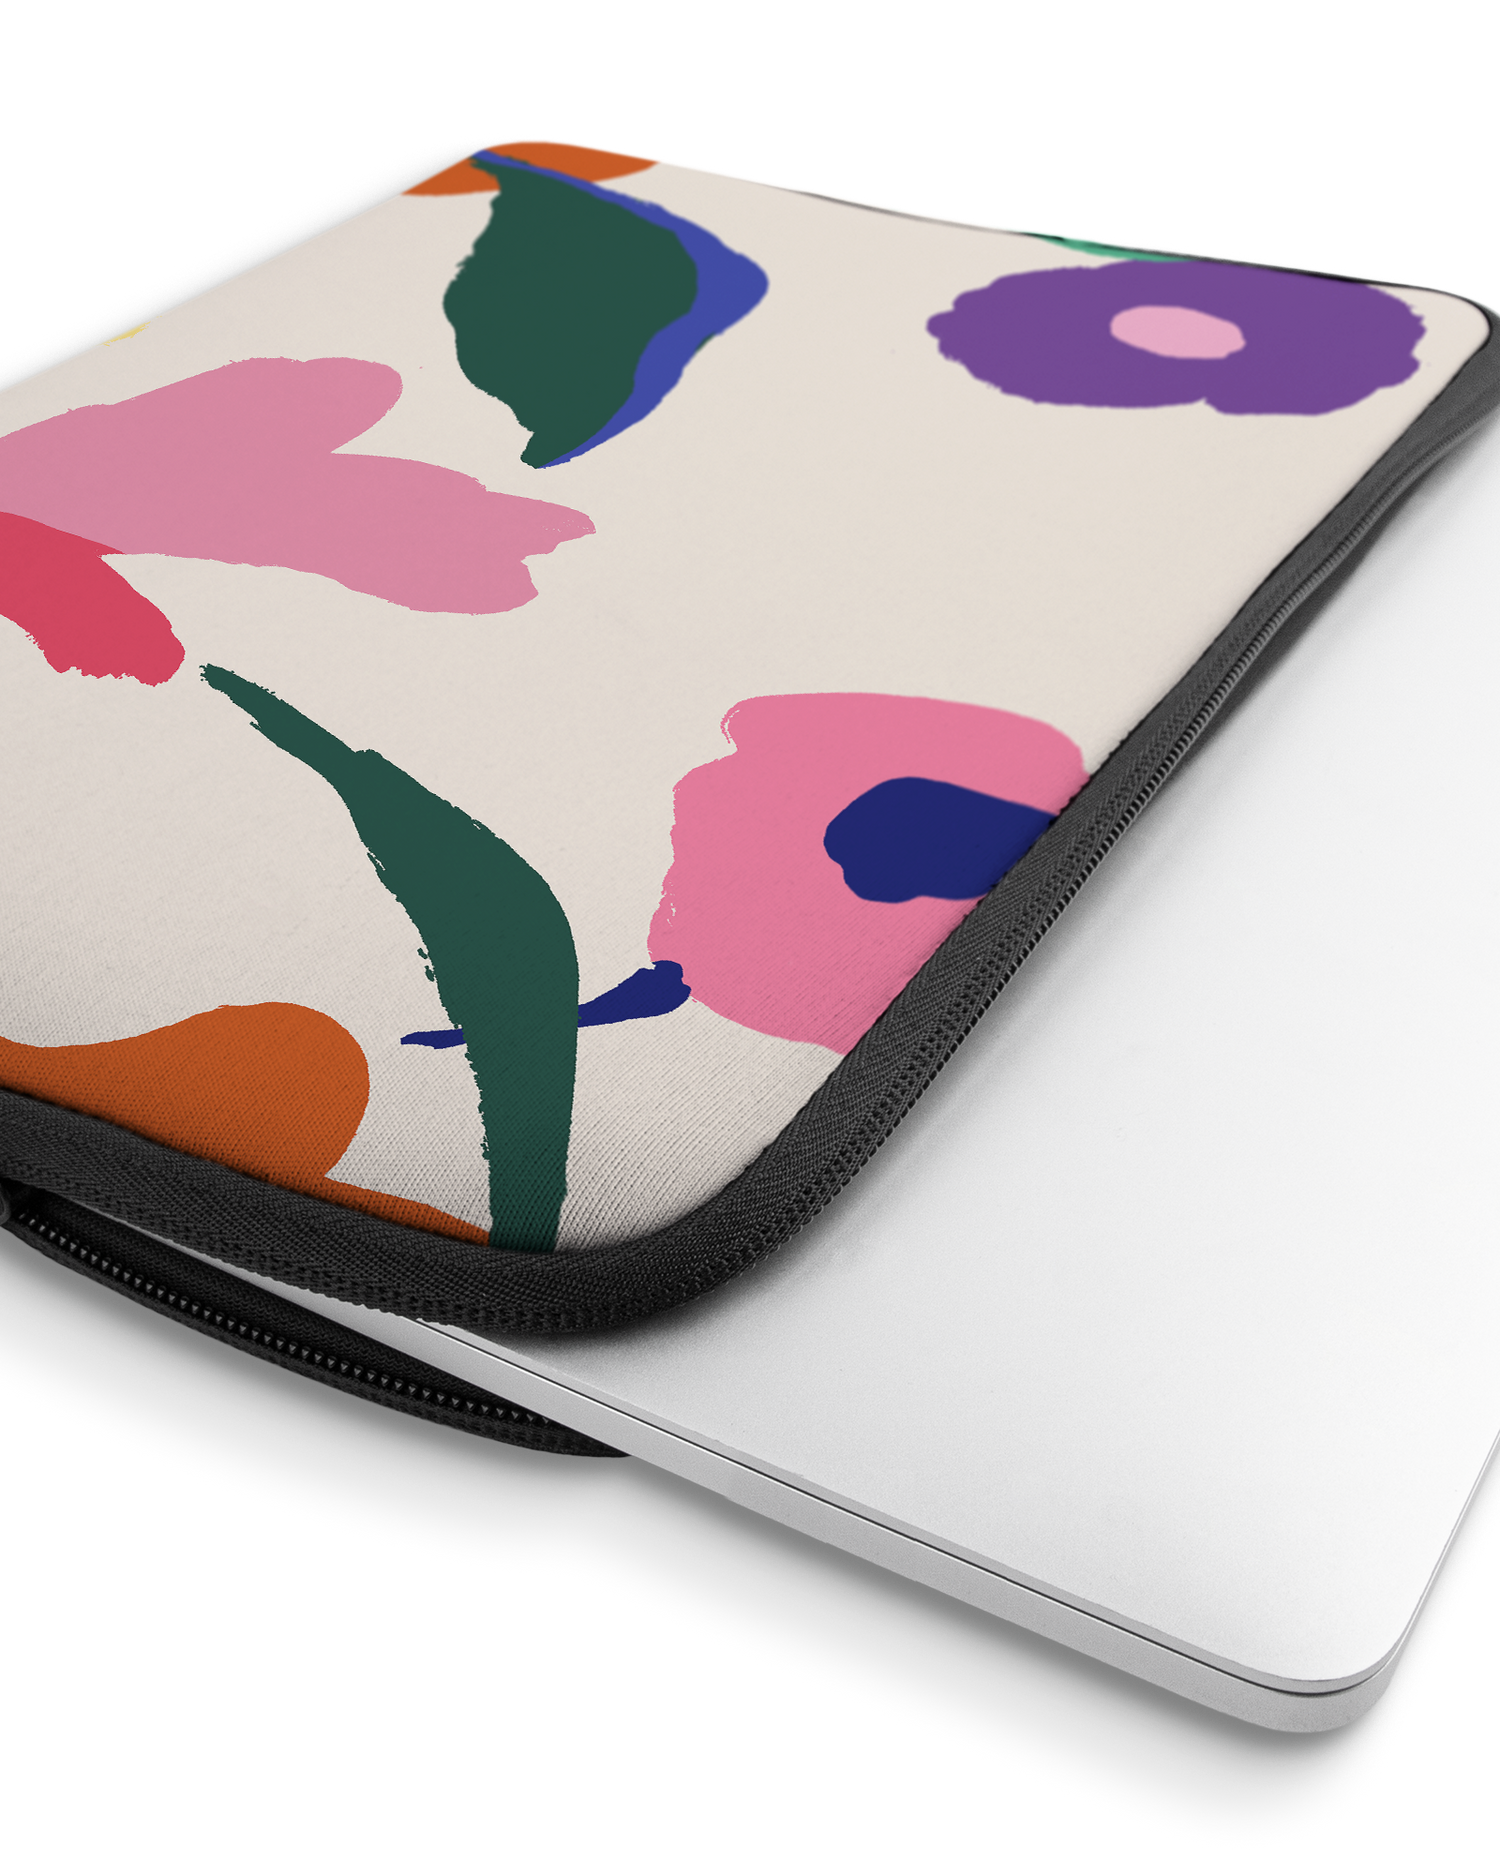 Handpainted Blooms Laptop Case 16 inch with device inside